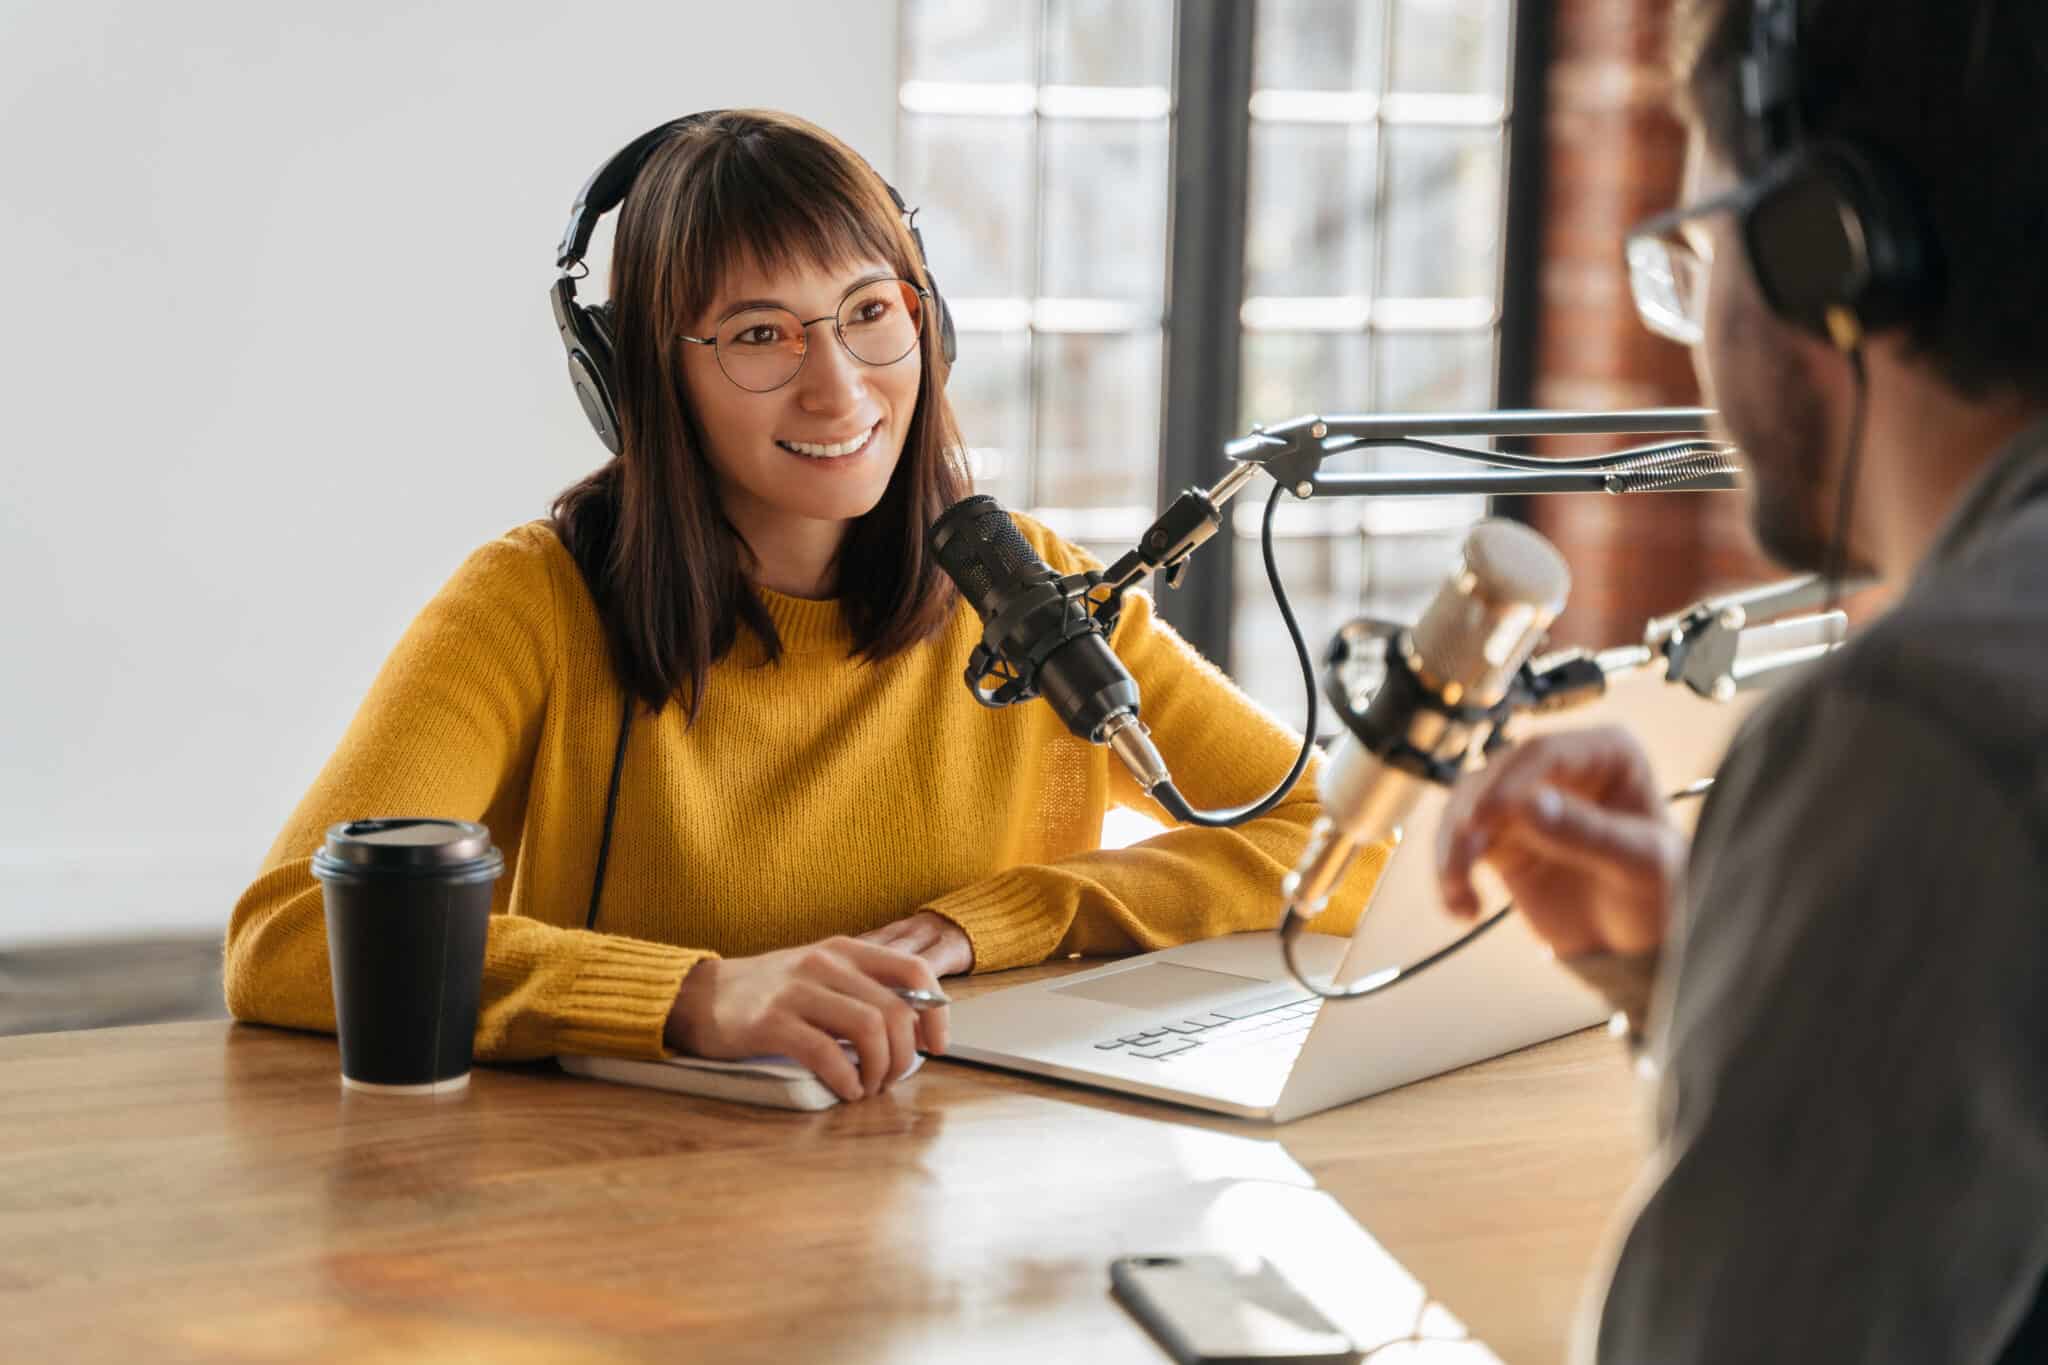 Podcasters host lively interview, using transcripts to boost their show's reach and accessibility.